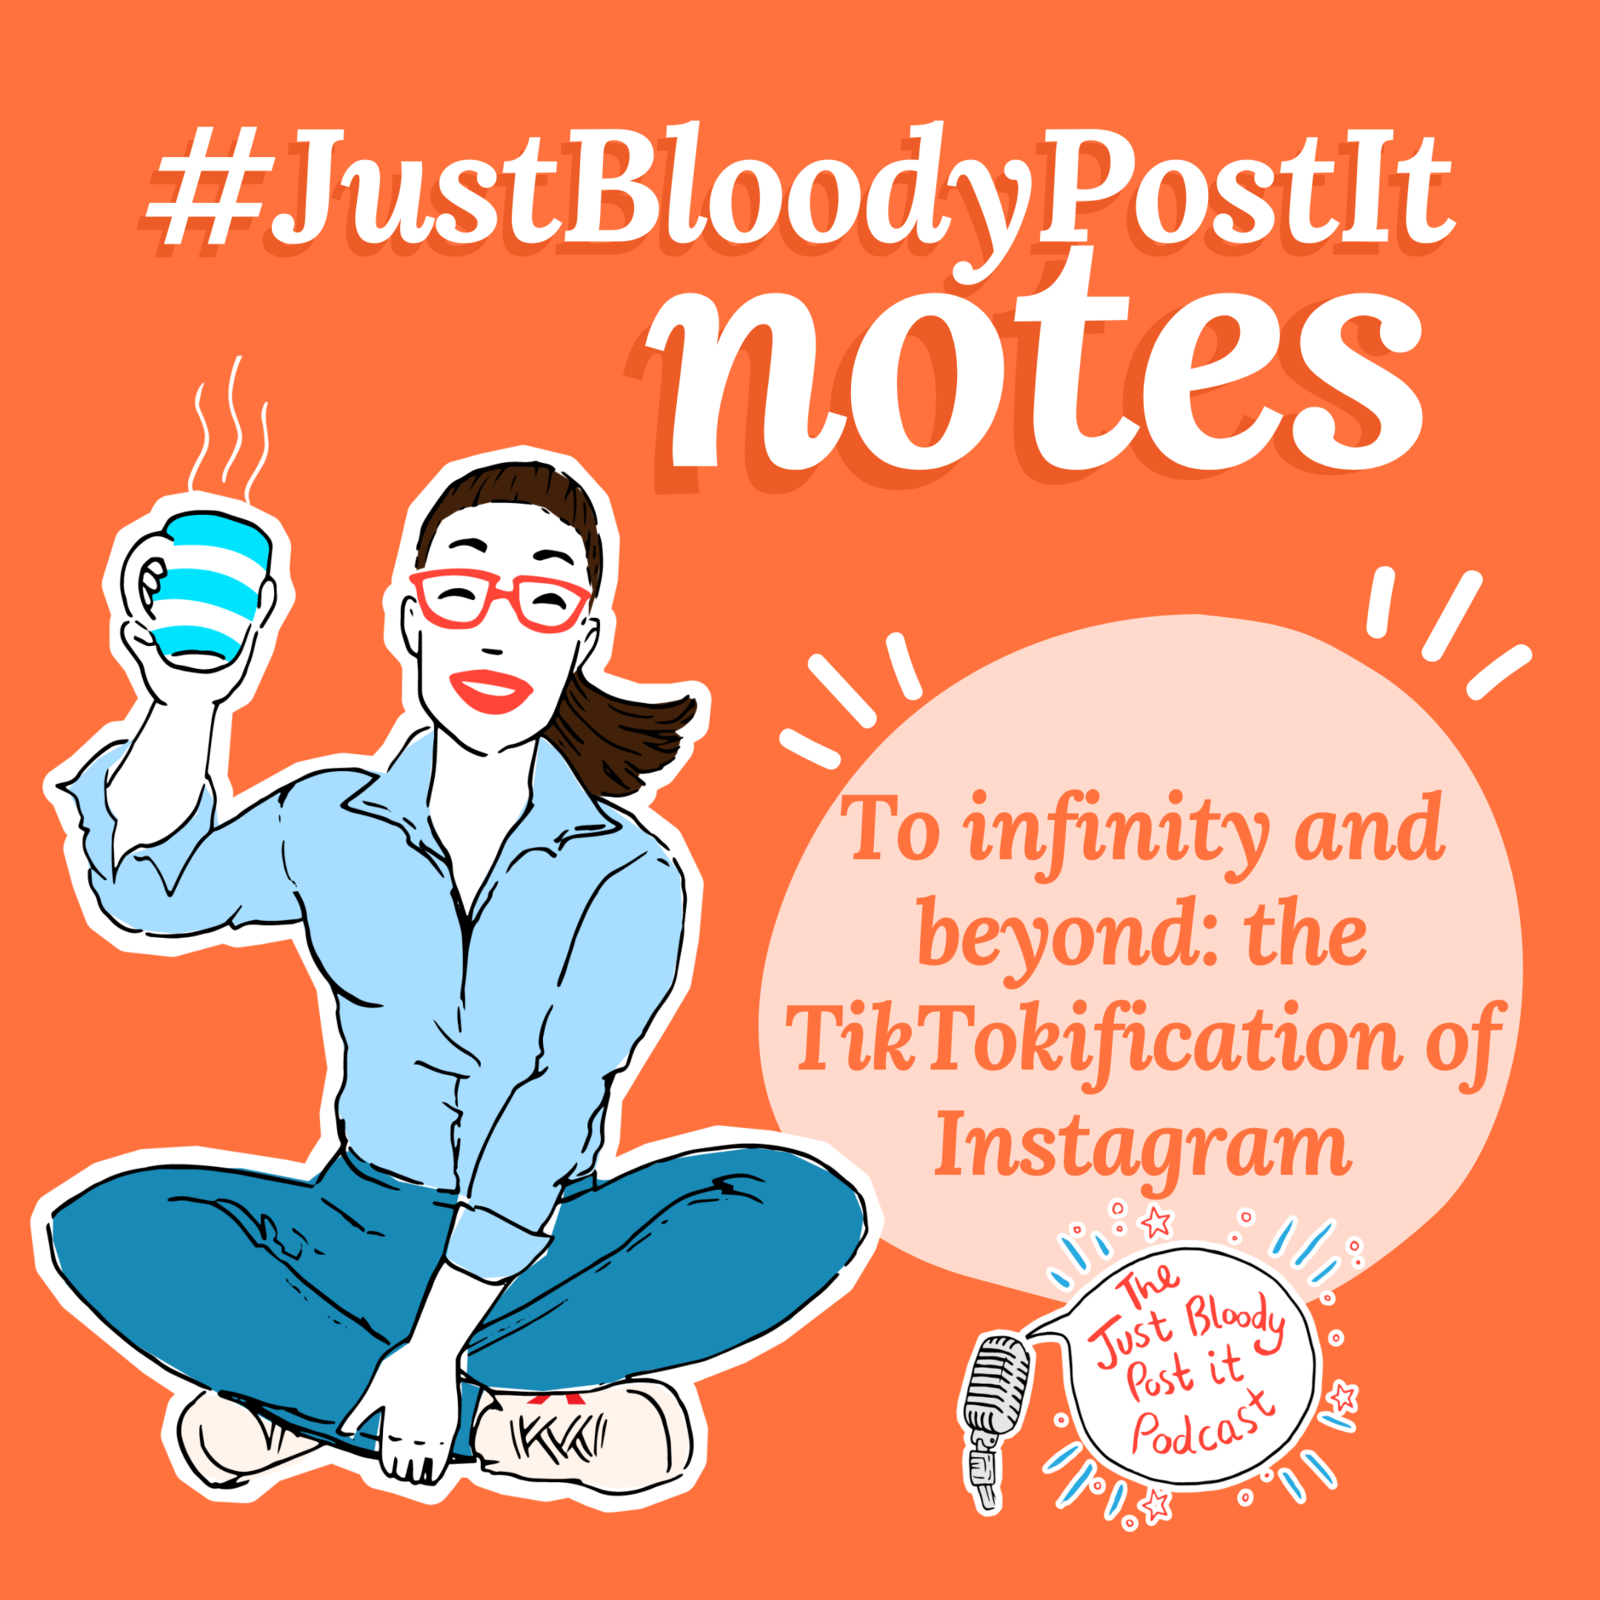 S4 Ep66: To infinity and beyond: the TikTokification of Instagram, a #JustBloodyPostIt Note